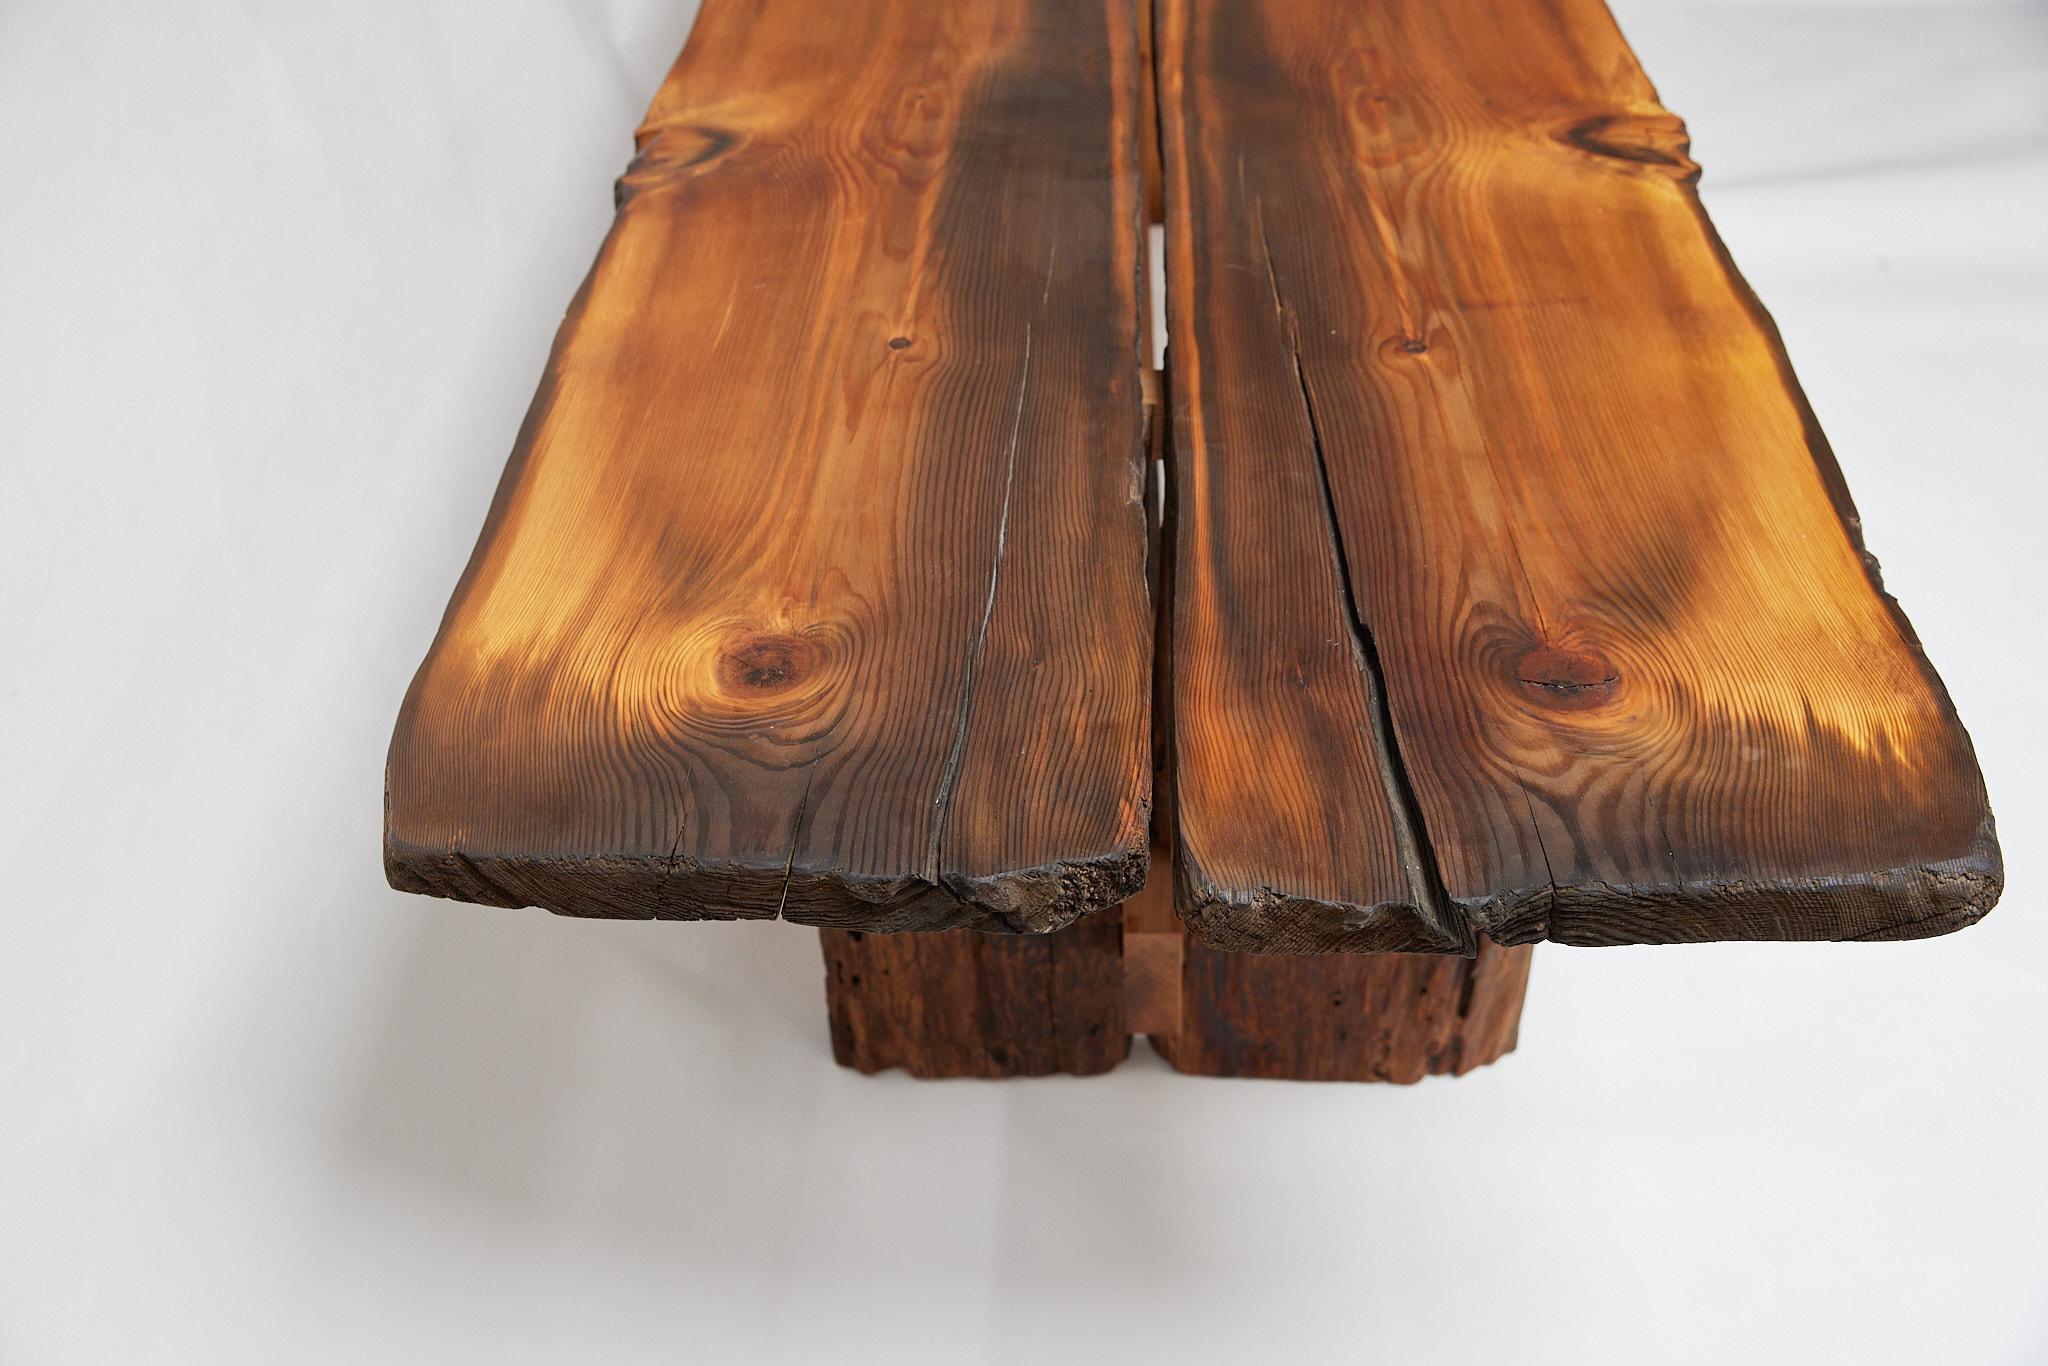 Oiled Plank Table in historical wood by Danish Fine Cabinetmaker Malte Gormsen  For Sale